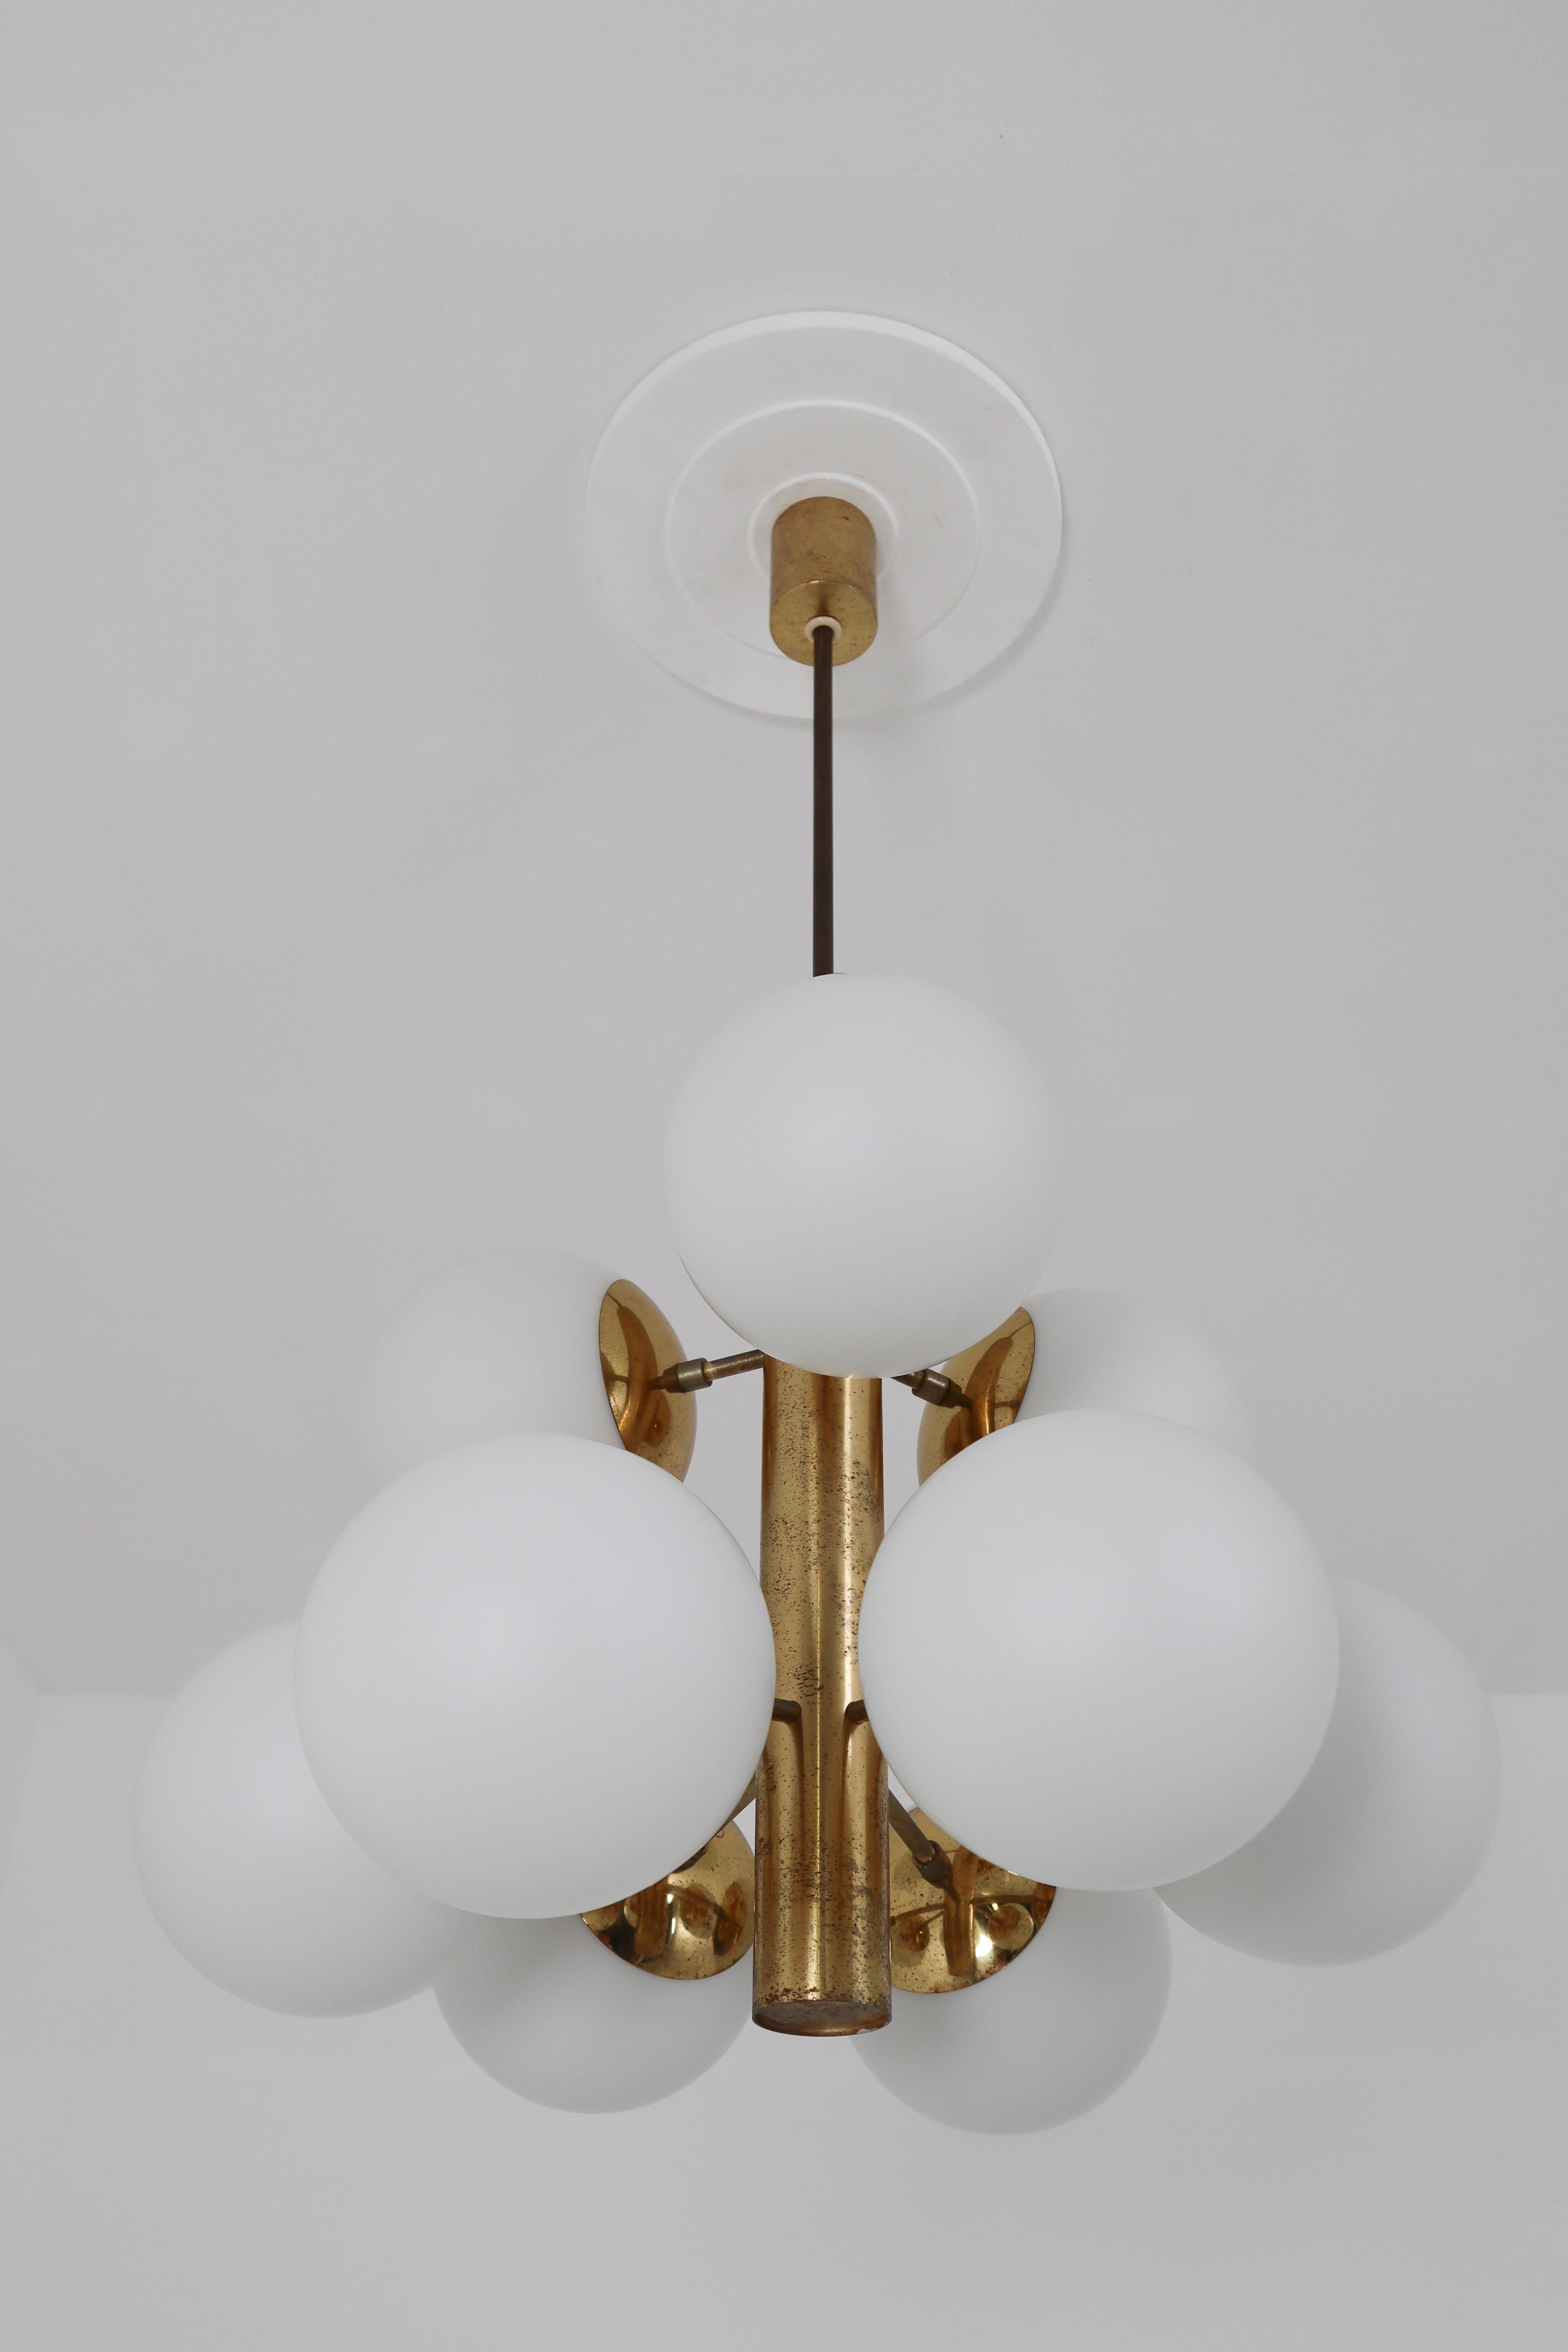 This fantastic Mid-Century Modernist Sputnik chandelier was designed in Germany 1960s featuring a patinated brass frame and nine handblown opal glass globes.